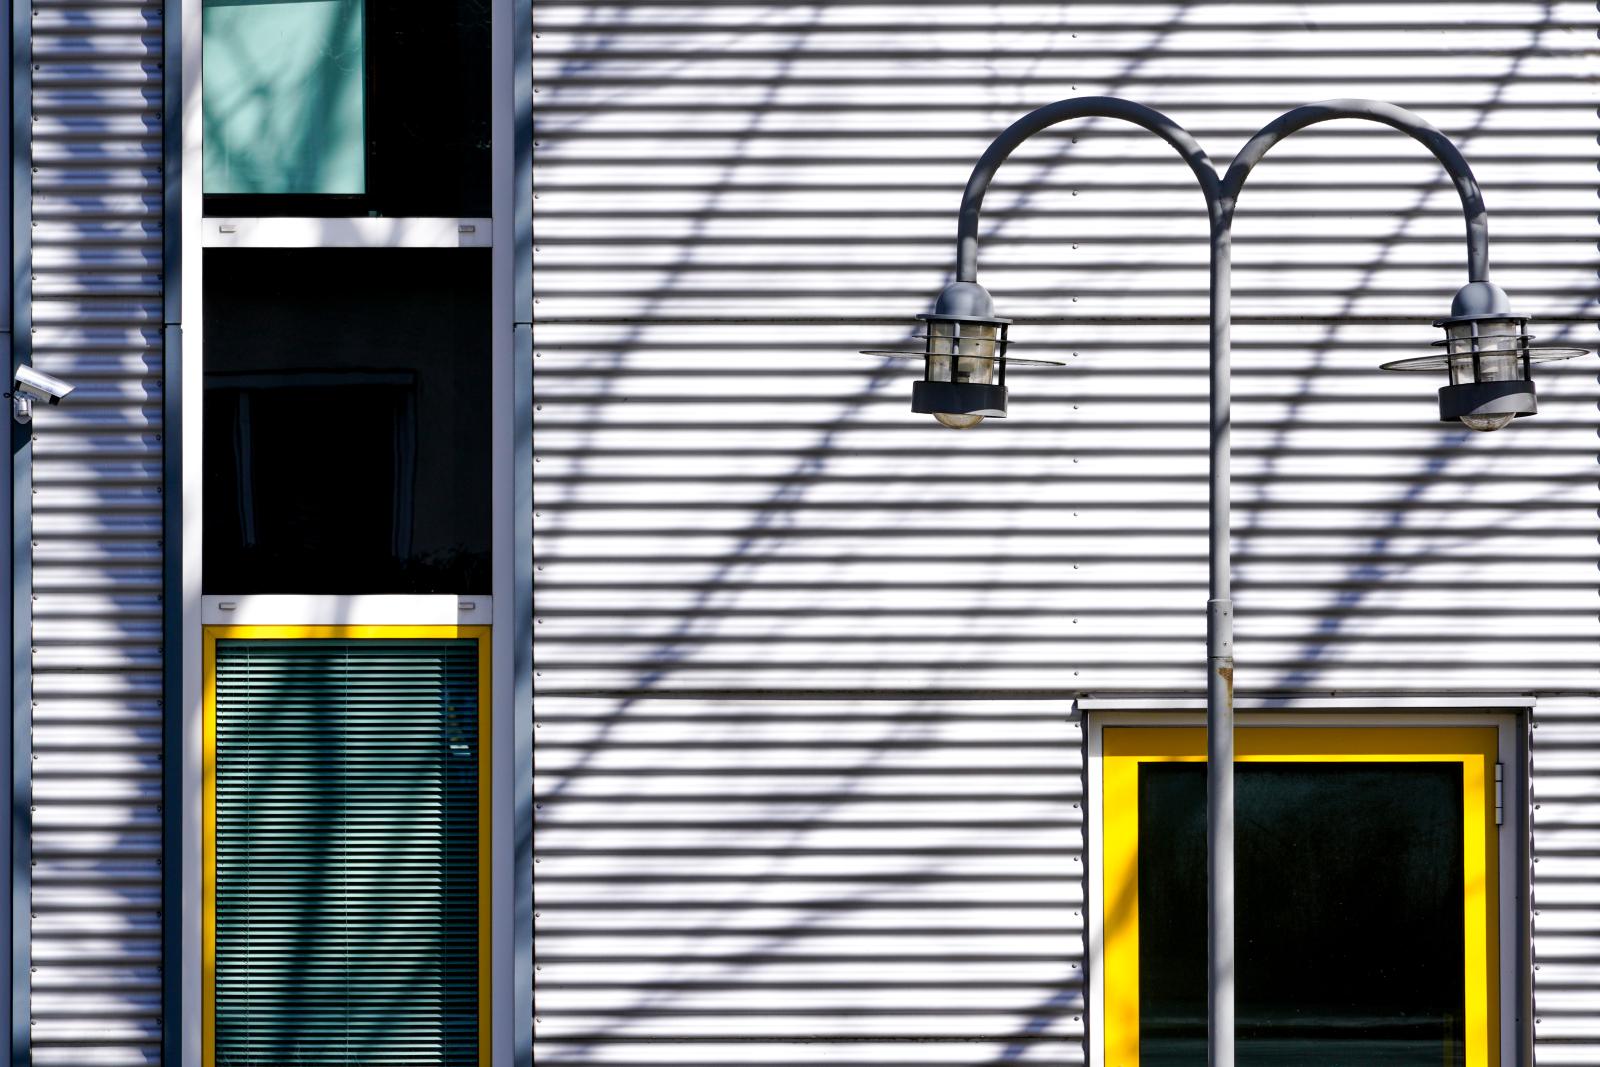 Geometry in Contrast | Buy this image